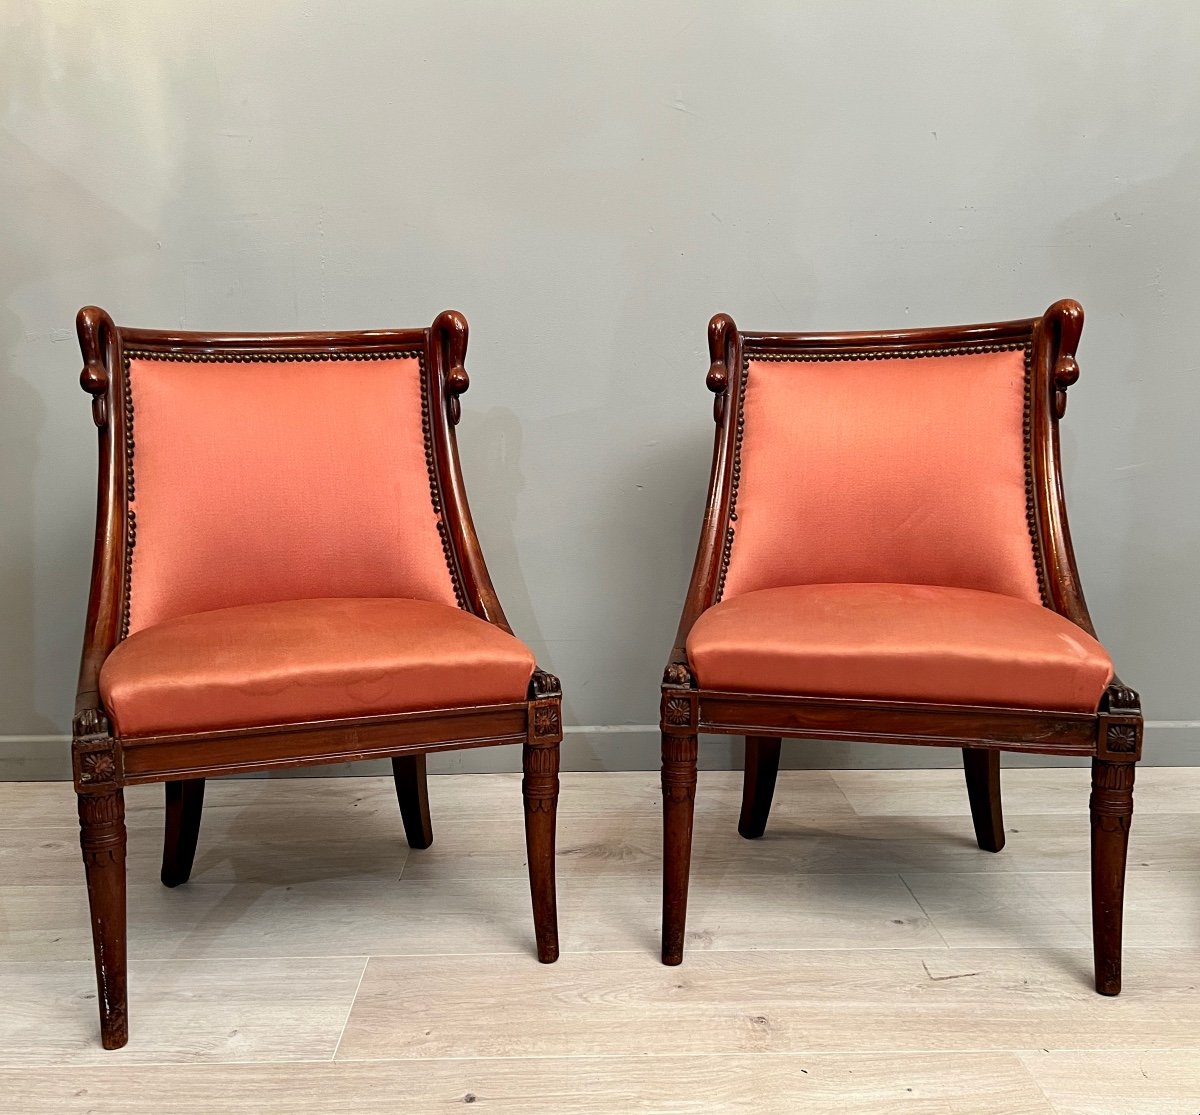 L. Costaz, Pair Of Mahogany Gondola Chairs From Directoire Period Around 1790